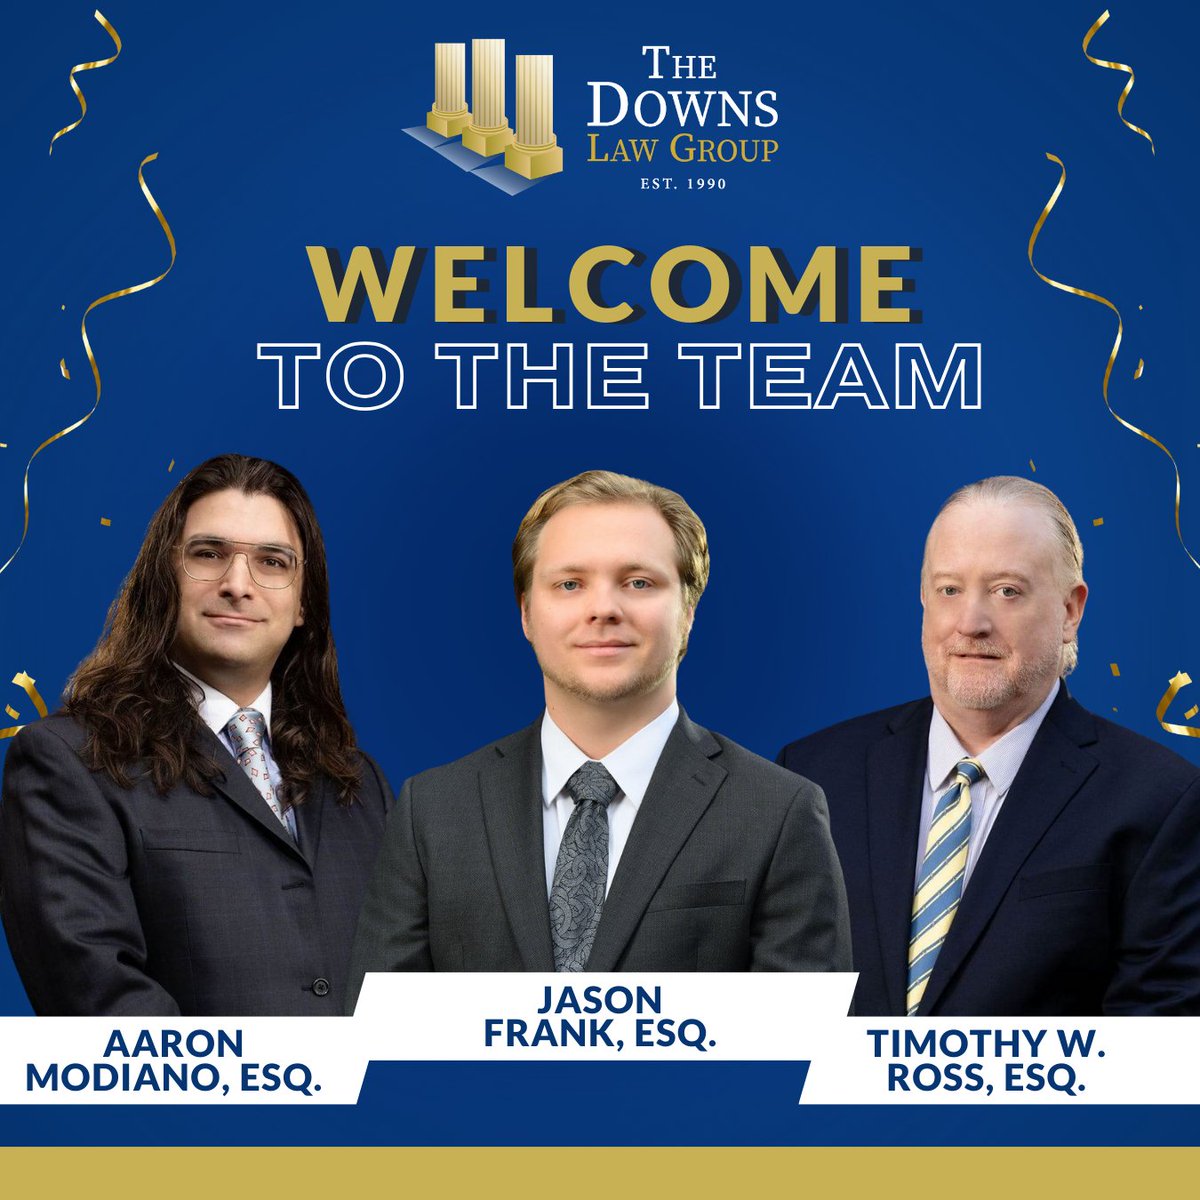 The Downs Law Group is thrilled to introduce Jason Frank, Esq. Timothy Ross, Esq., and Aaron Modiano Esq. who have recently joined our team!💫

We’re excited to have them on board, each bringing their unique skills, expertise, & passion for justice to our firm.⚖️✊

 #NewEmployee